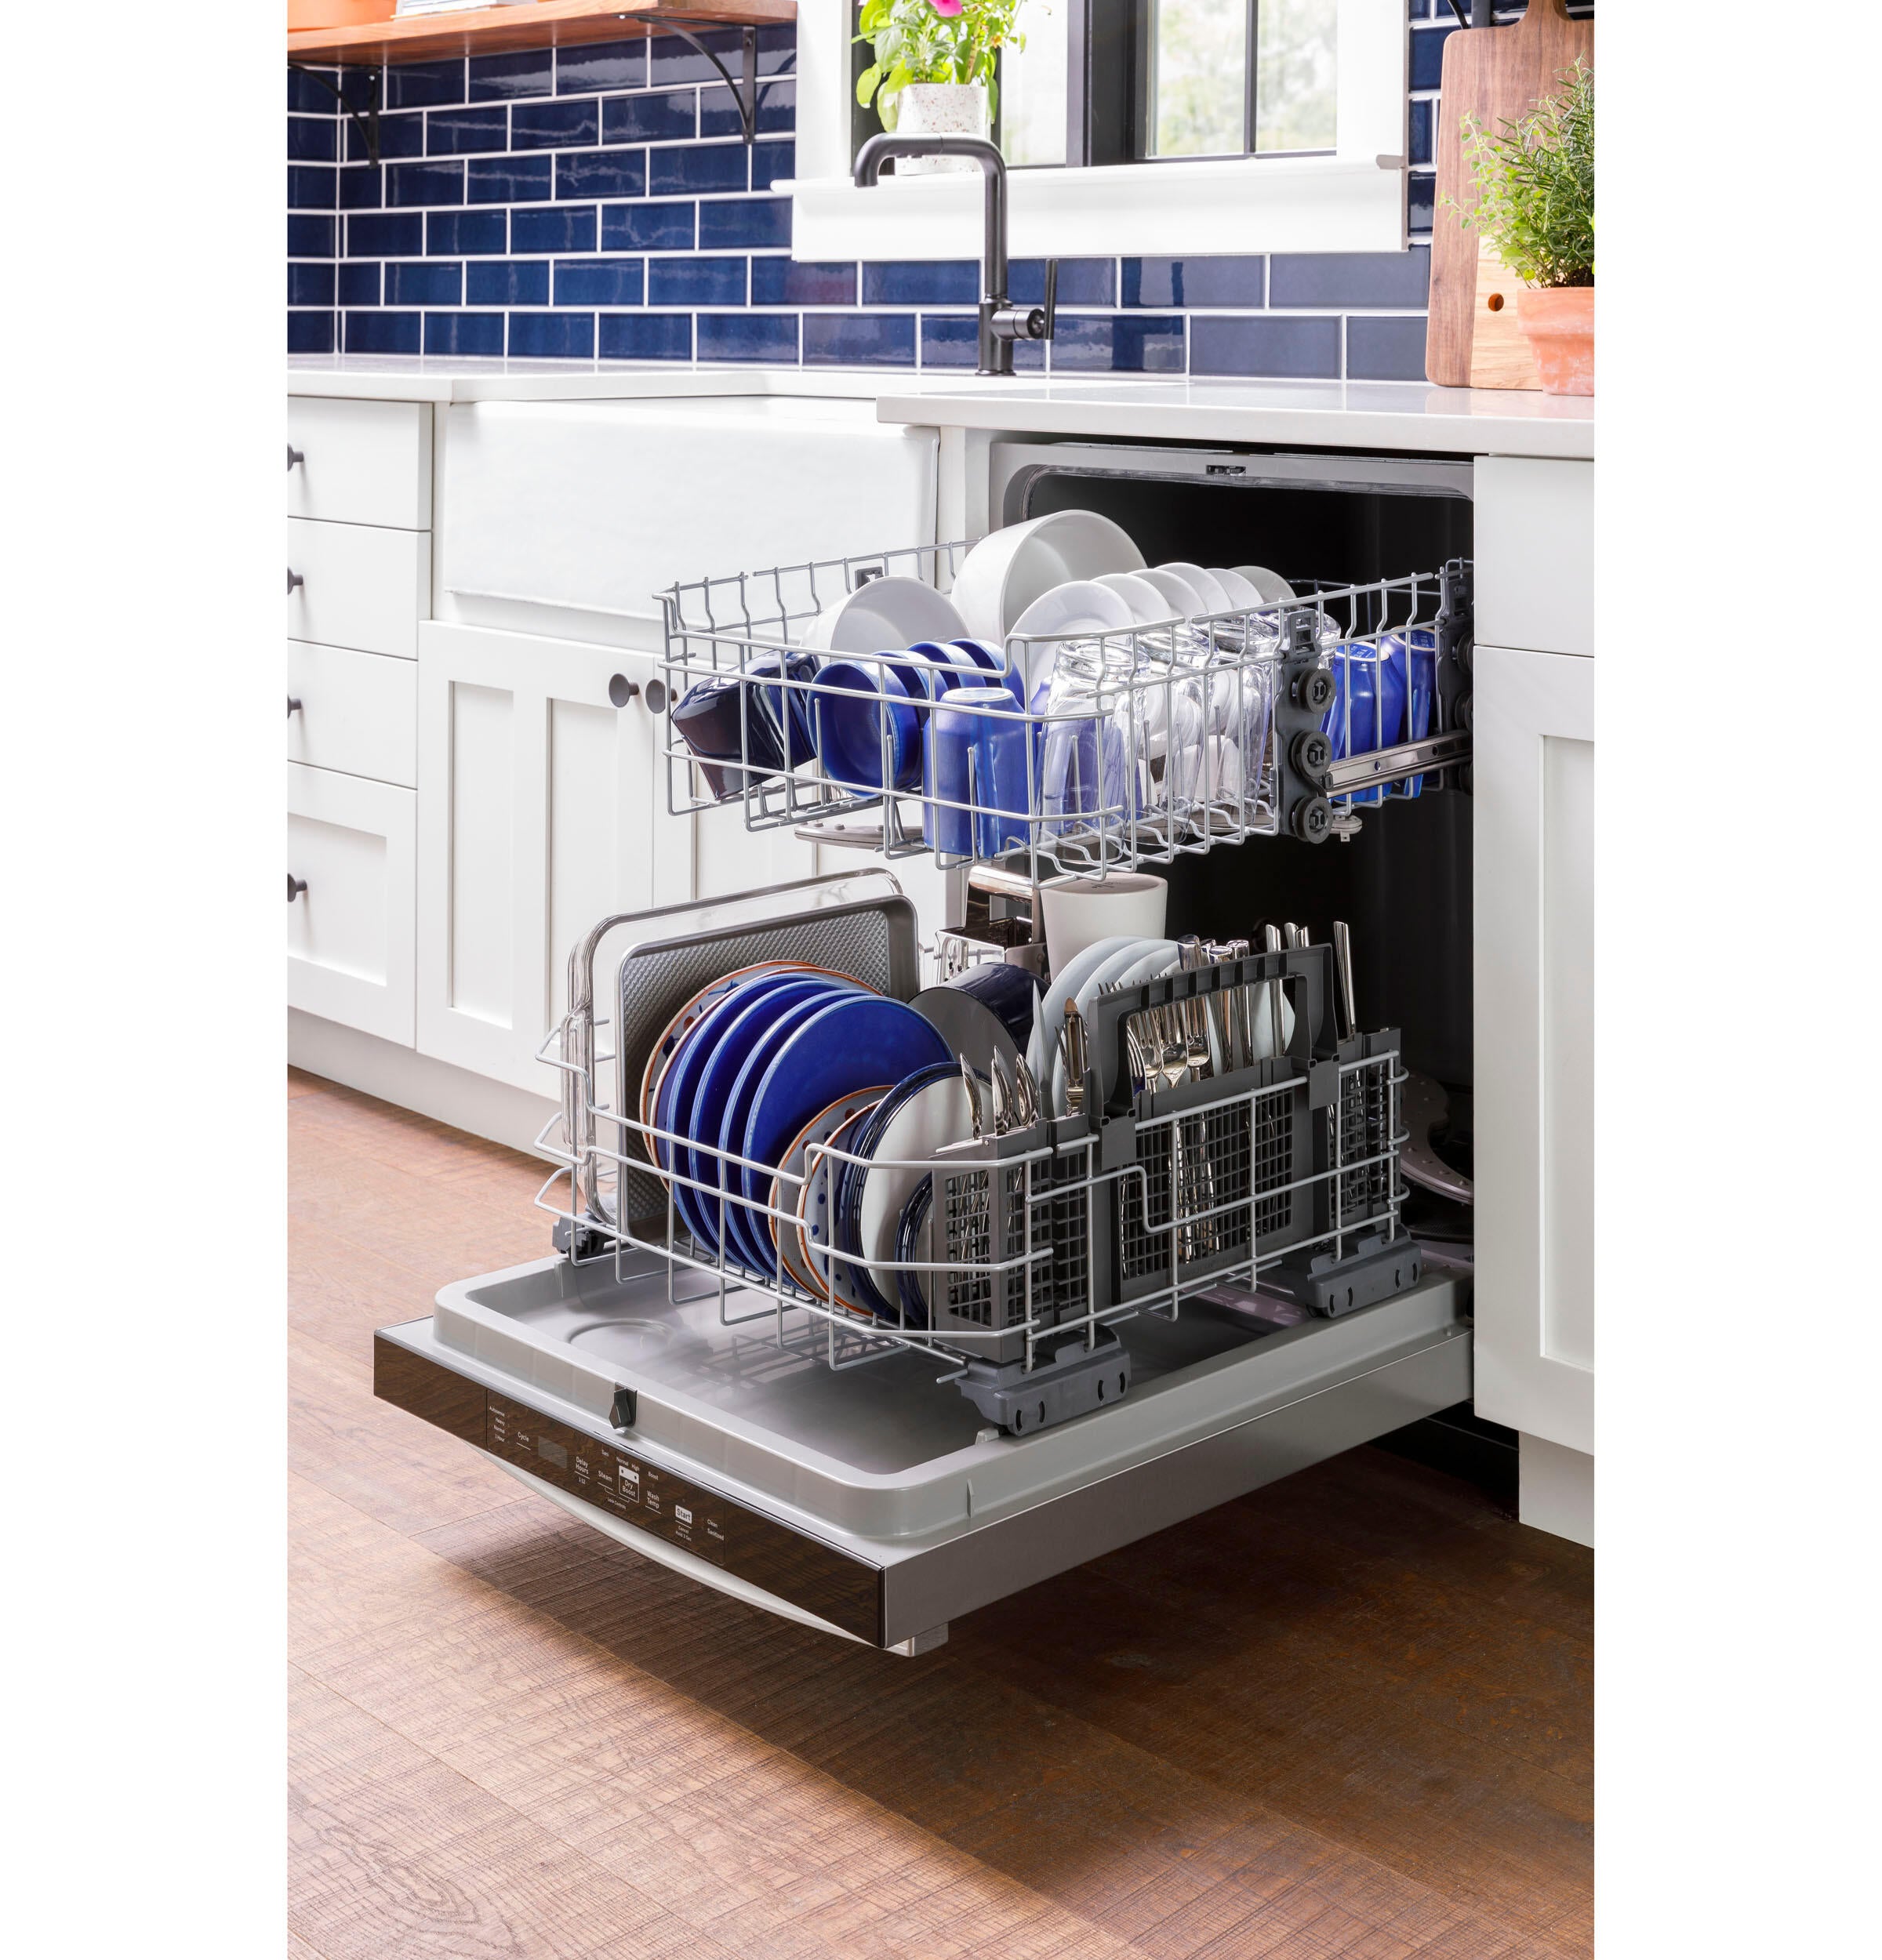 Ge Appliances GDT550PYRFS Ge® Top Control With Plastic Interior Dishwasher With Sanitize Cycle & Dry Boost